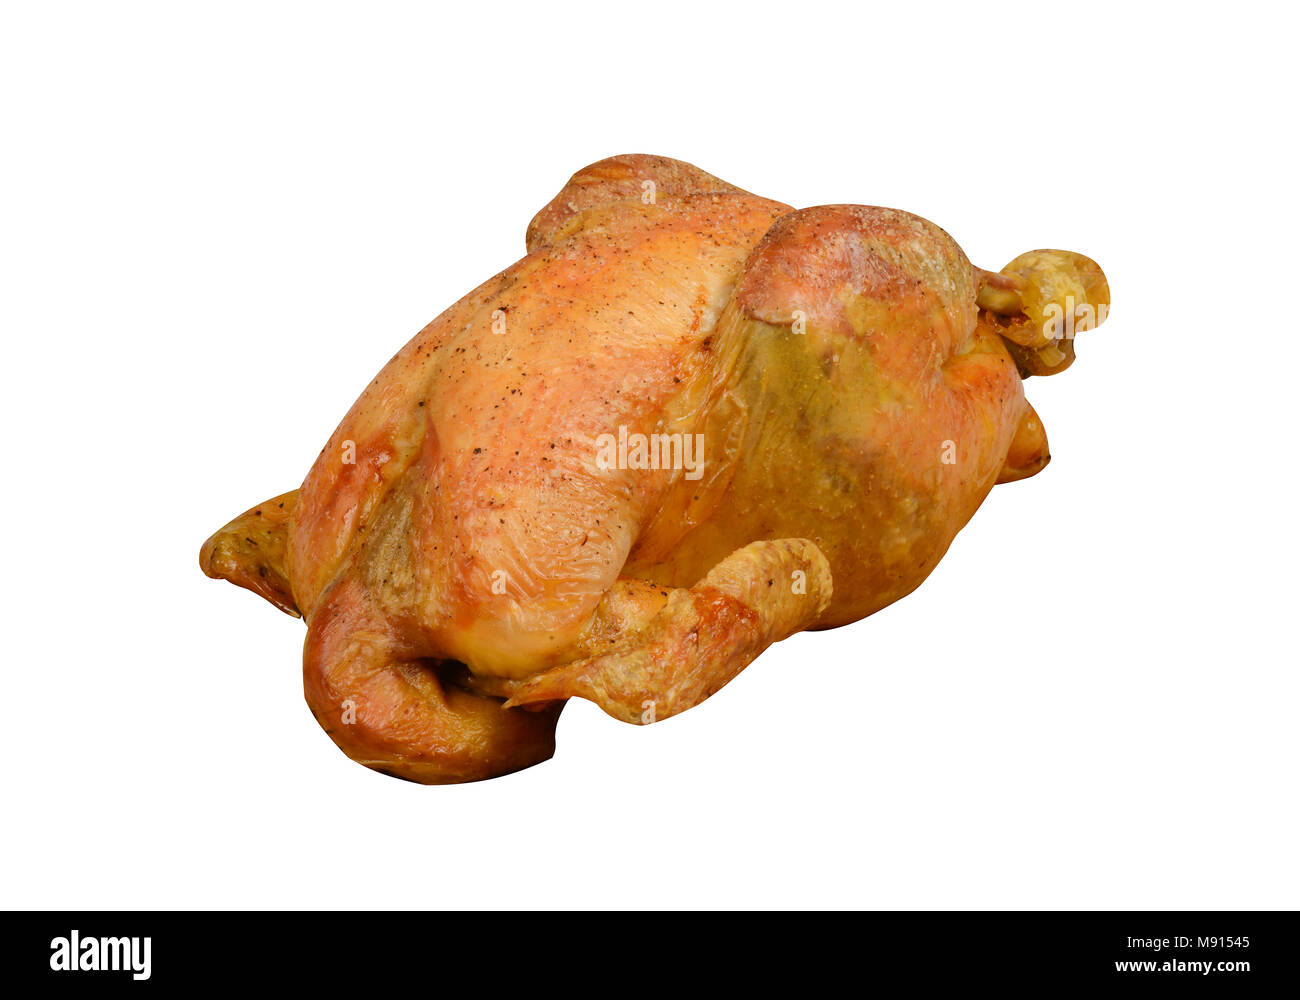 Poultry Roast Chicken, Food Cooking Stock Photo